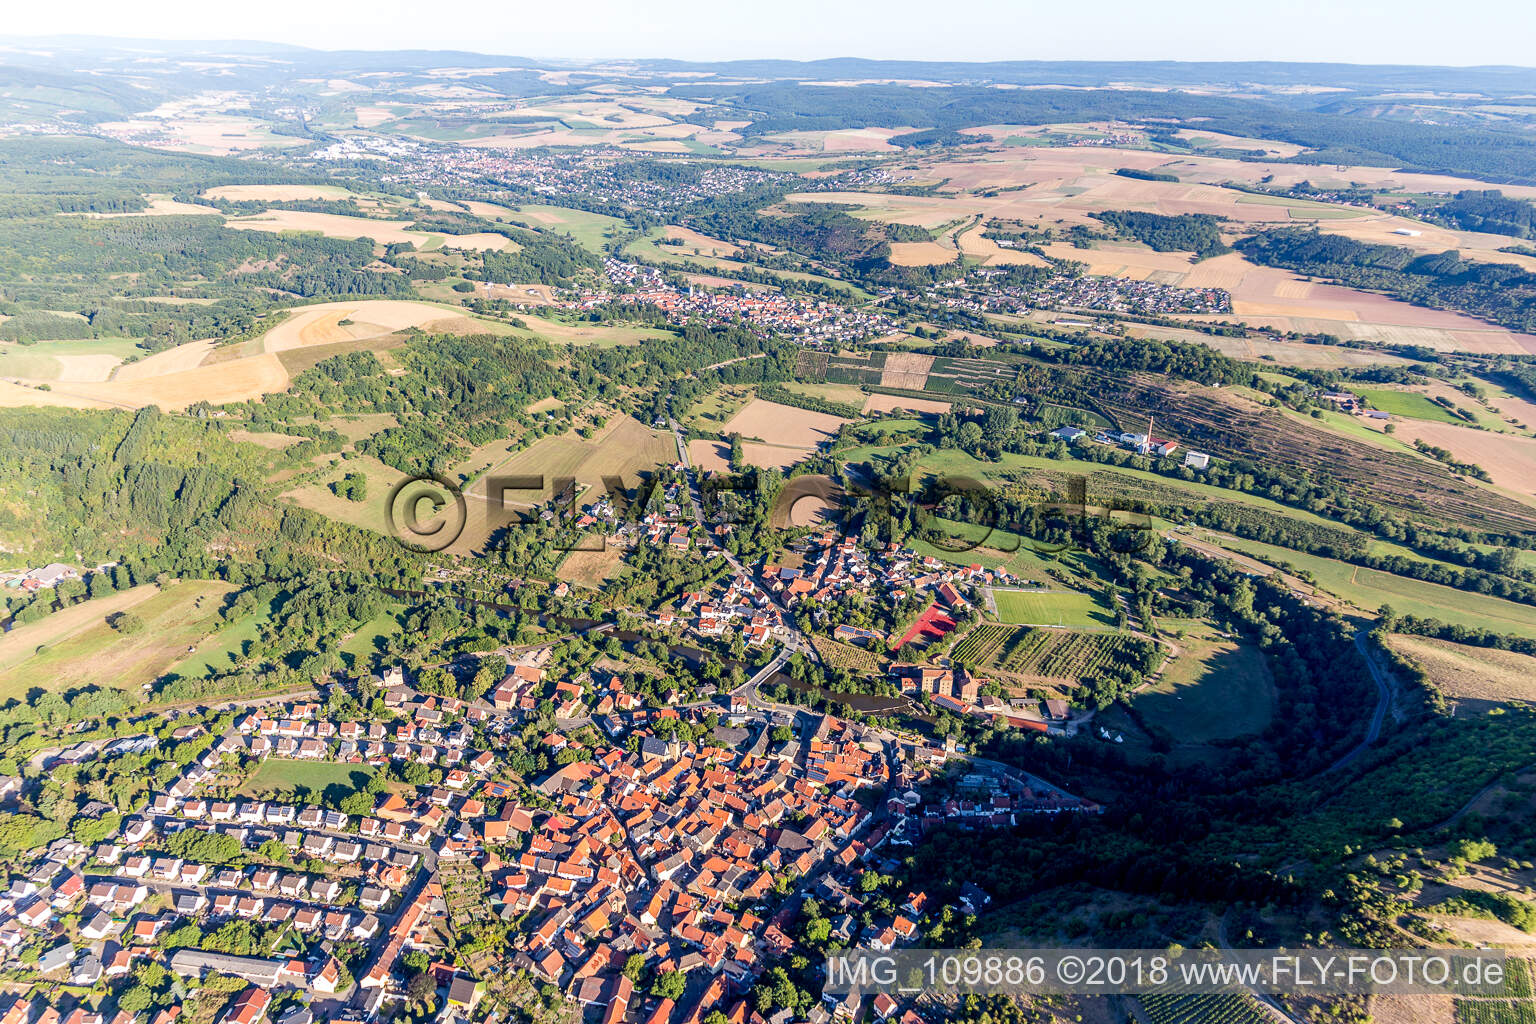 Odernheim am Glan in the state Rhineland-Palatinate, Germany from the plane